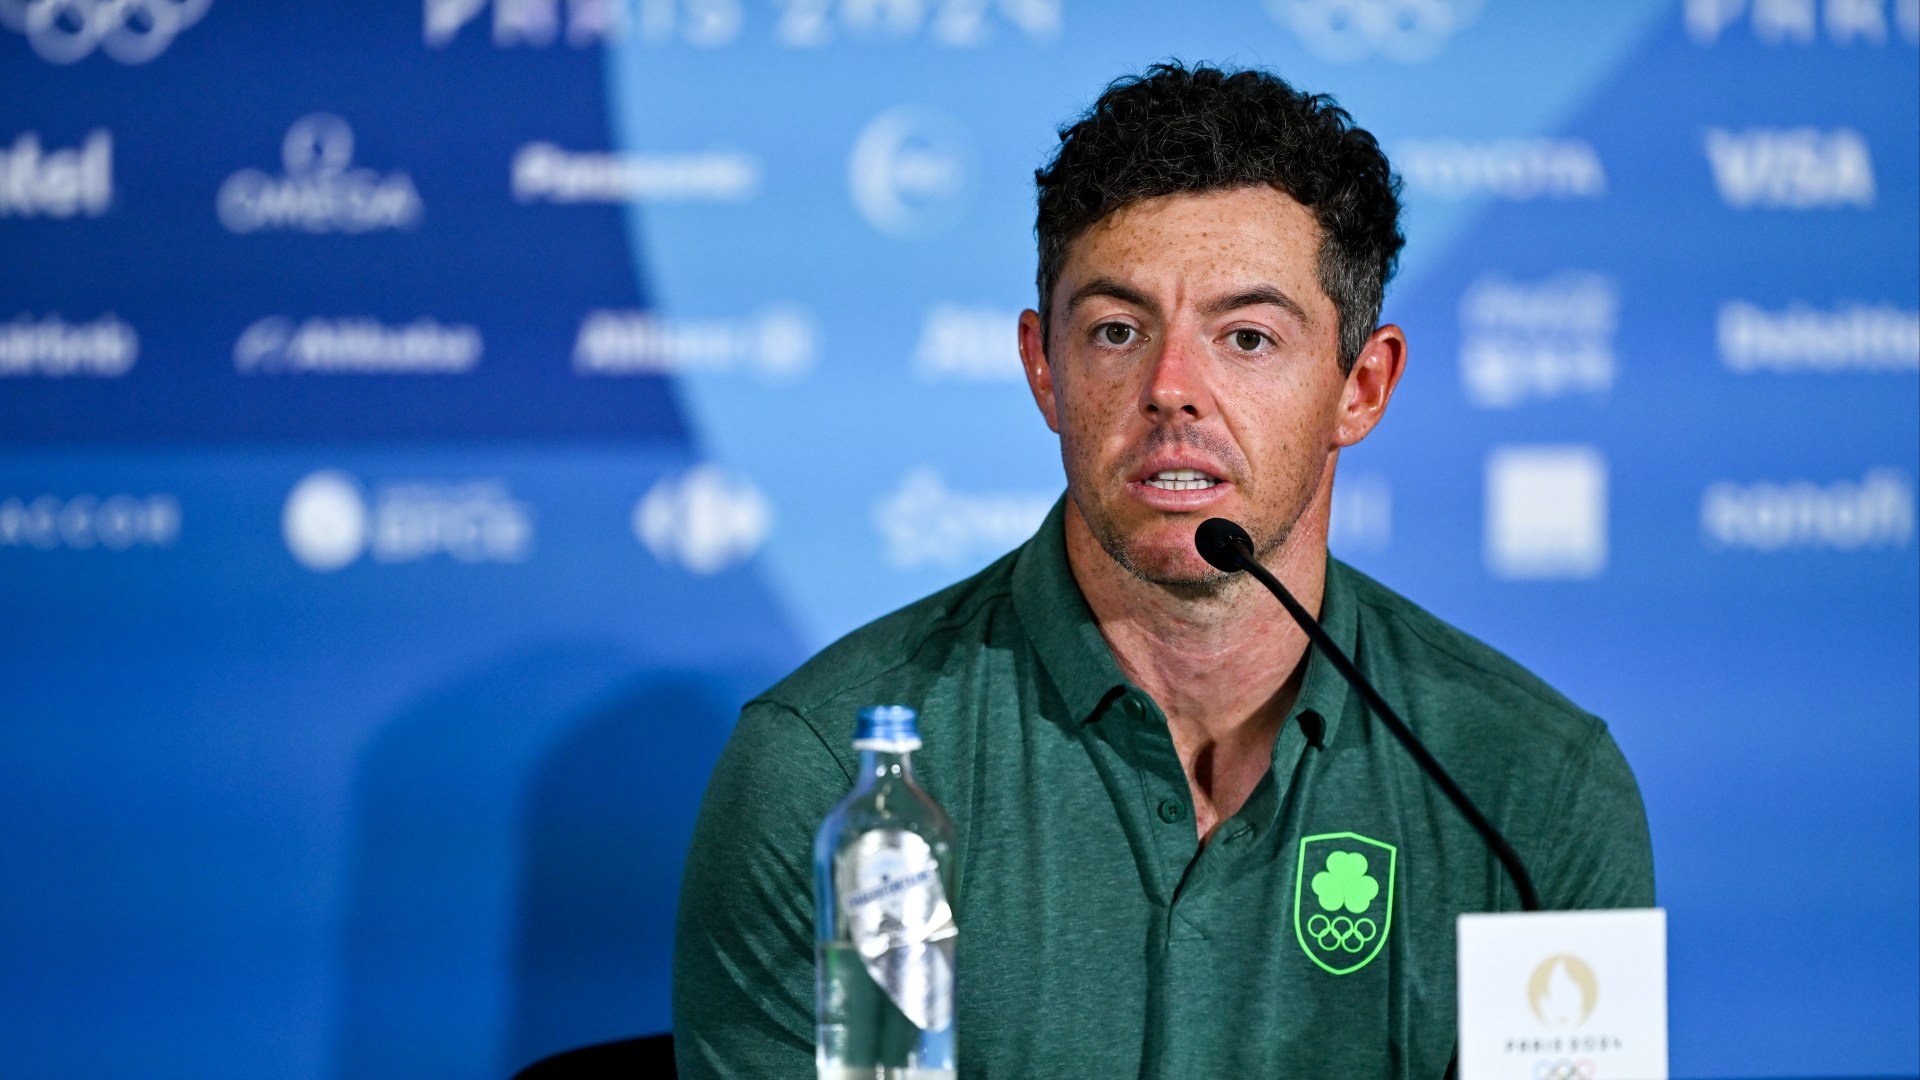 Why is Rory McIlroy representing Ireland and not Team GB at the Olympics 2024?